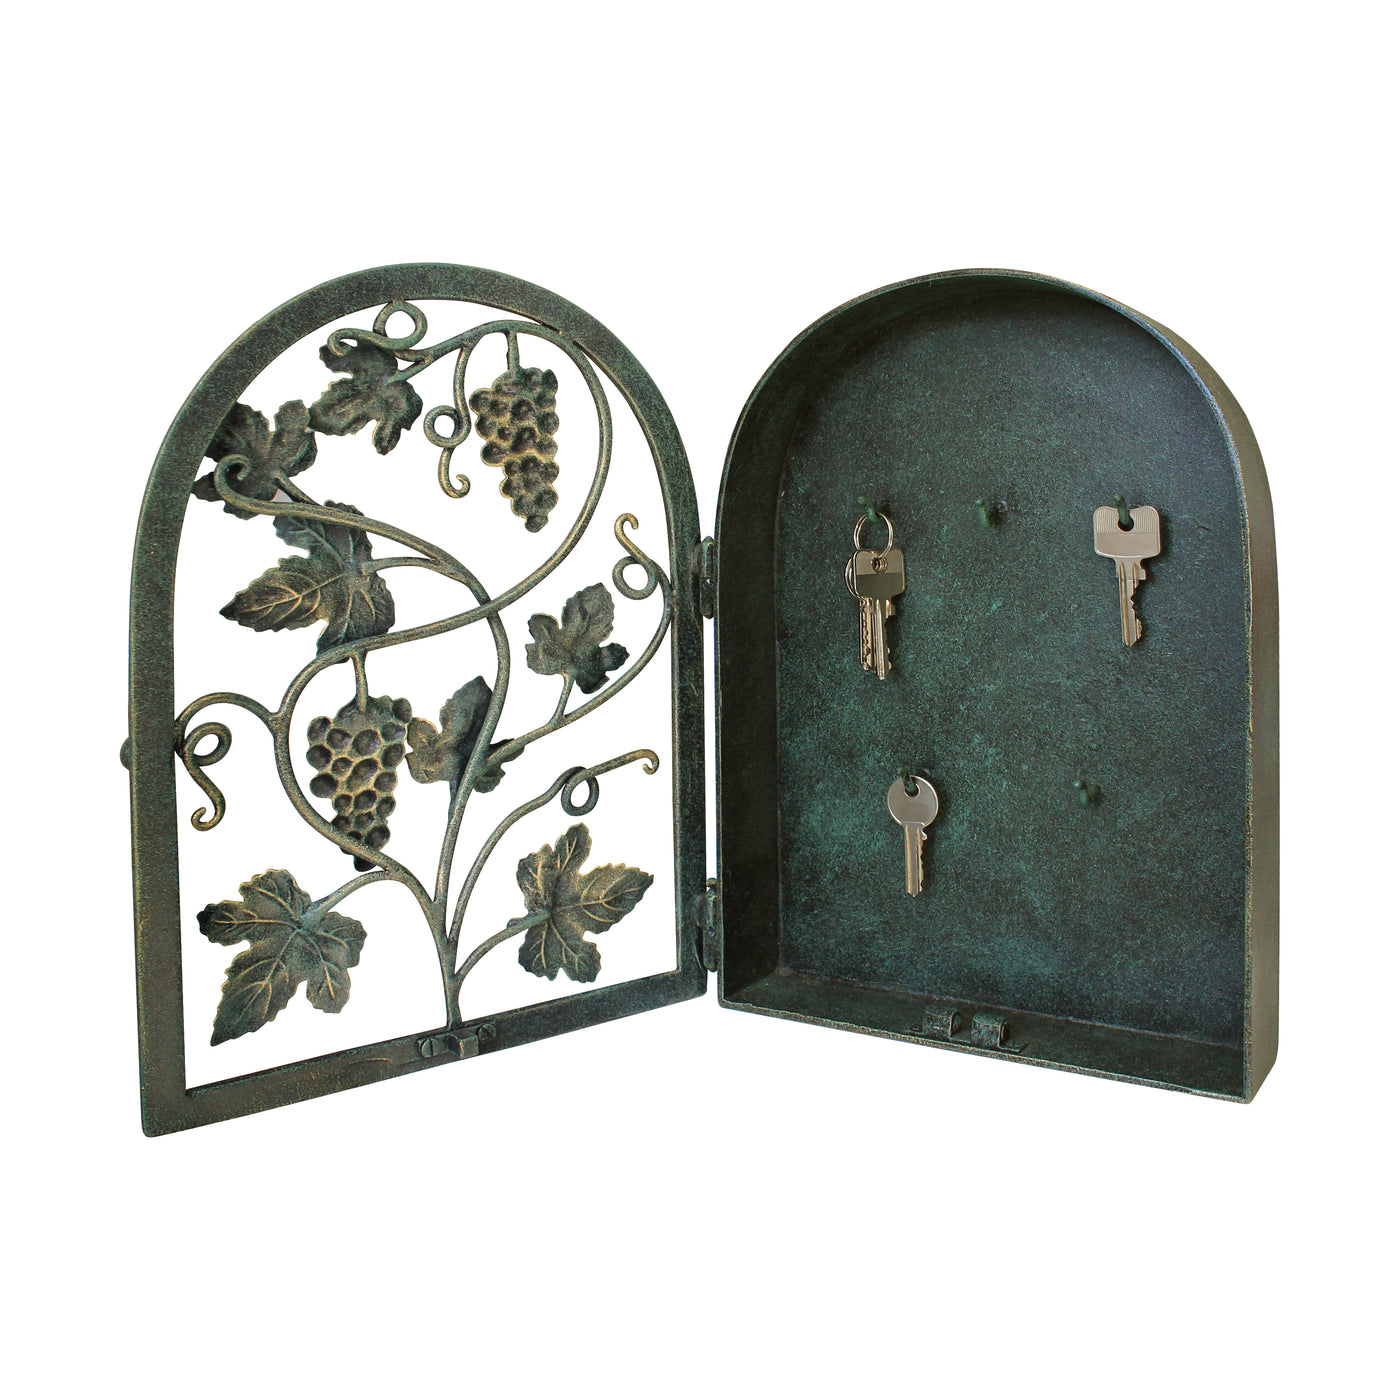 An opened arched rustic key cabinet inspired from grape vines painted in antique green